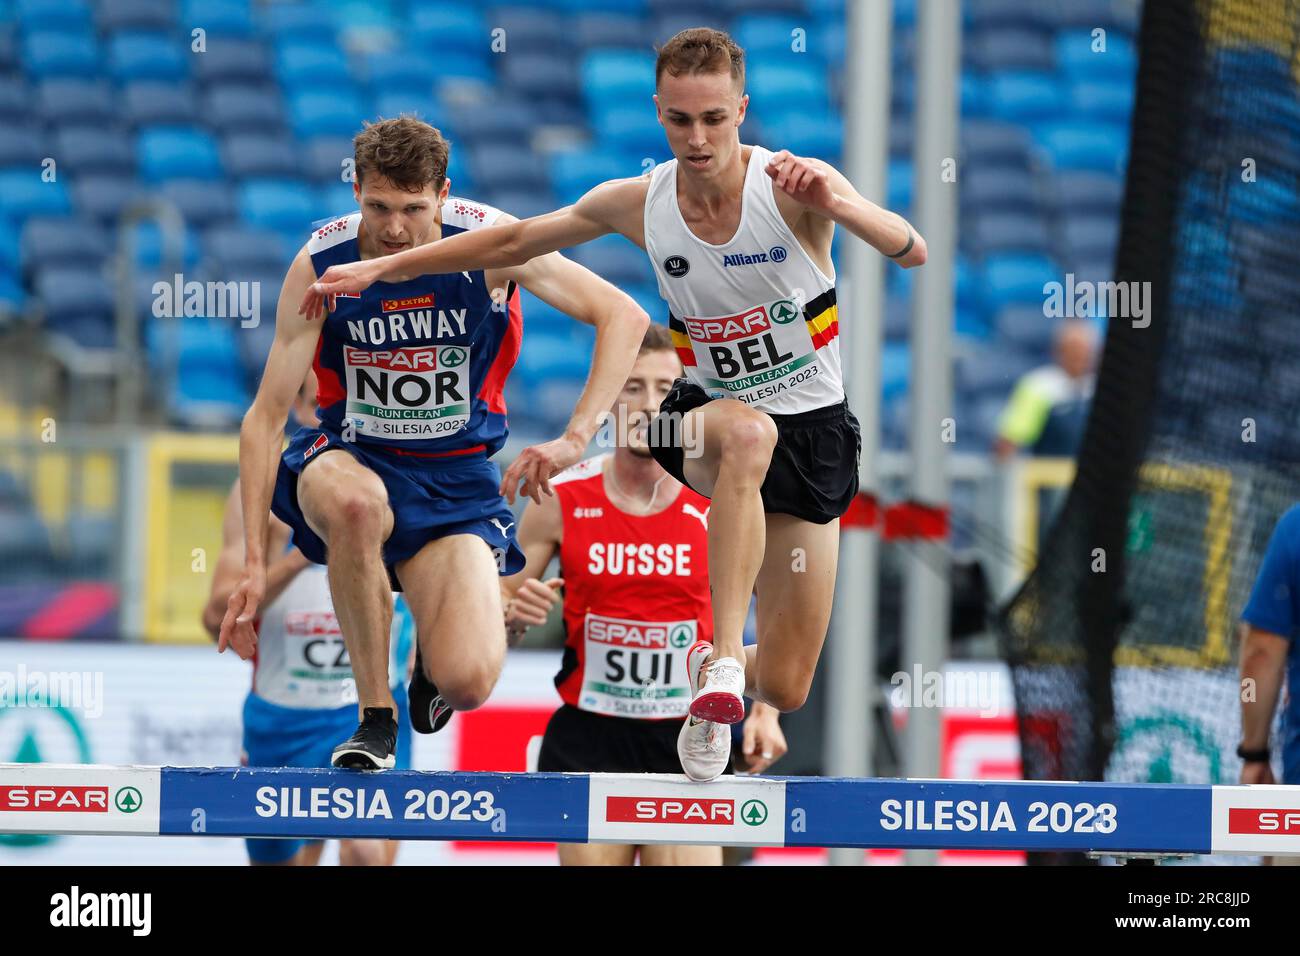 Chorzow, Poland. 23 June, 2023: Clement Deflandre of Belgium competes in Men's 3000m Steeplechase race during the European Teams Athletics Championships, European Games - Day 4 at Slaski Stadium in Chorzow, Poland. June 23, 2023. (Photo by Nikola Krstic/Alamy) Stock Photo